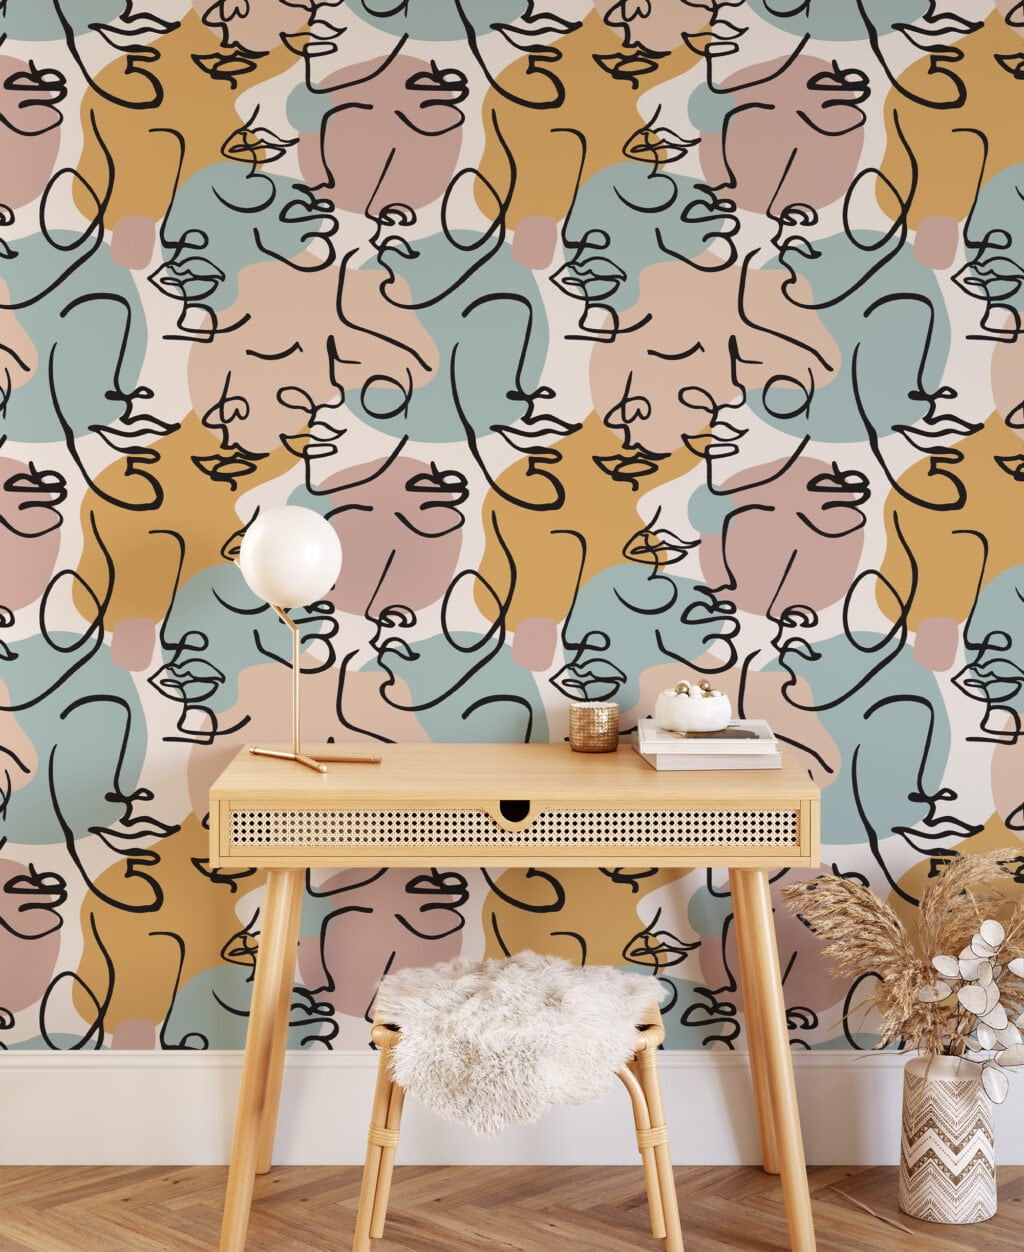 Abstract Human Face Design Pattern Wallpaper, Modern Faces Collage Peel & Stick Wall Mural